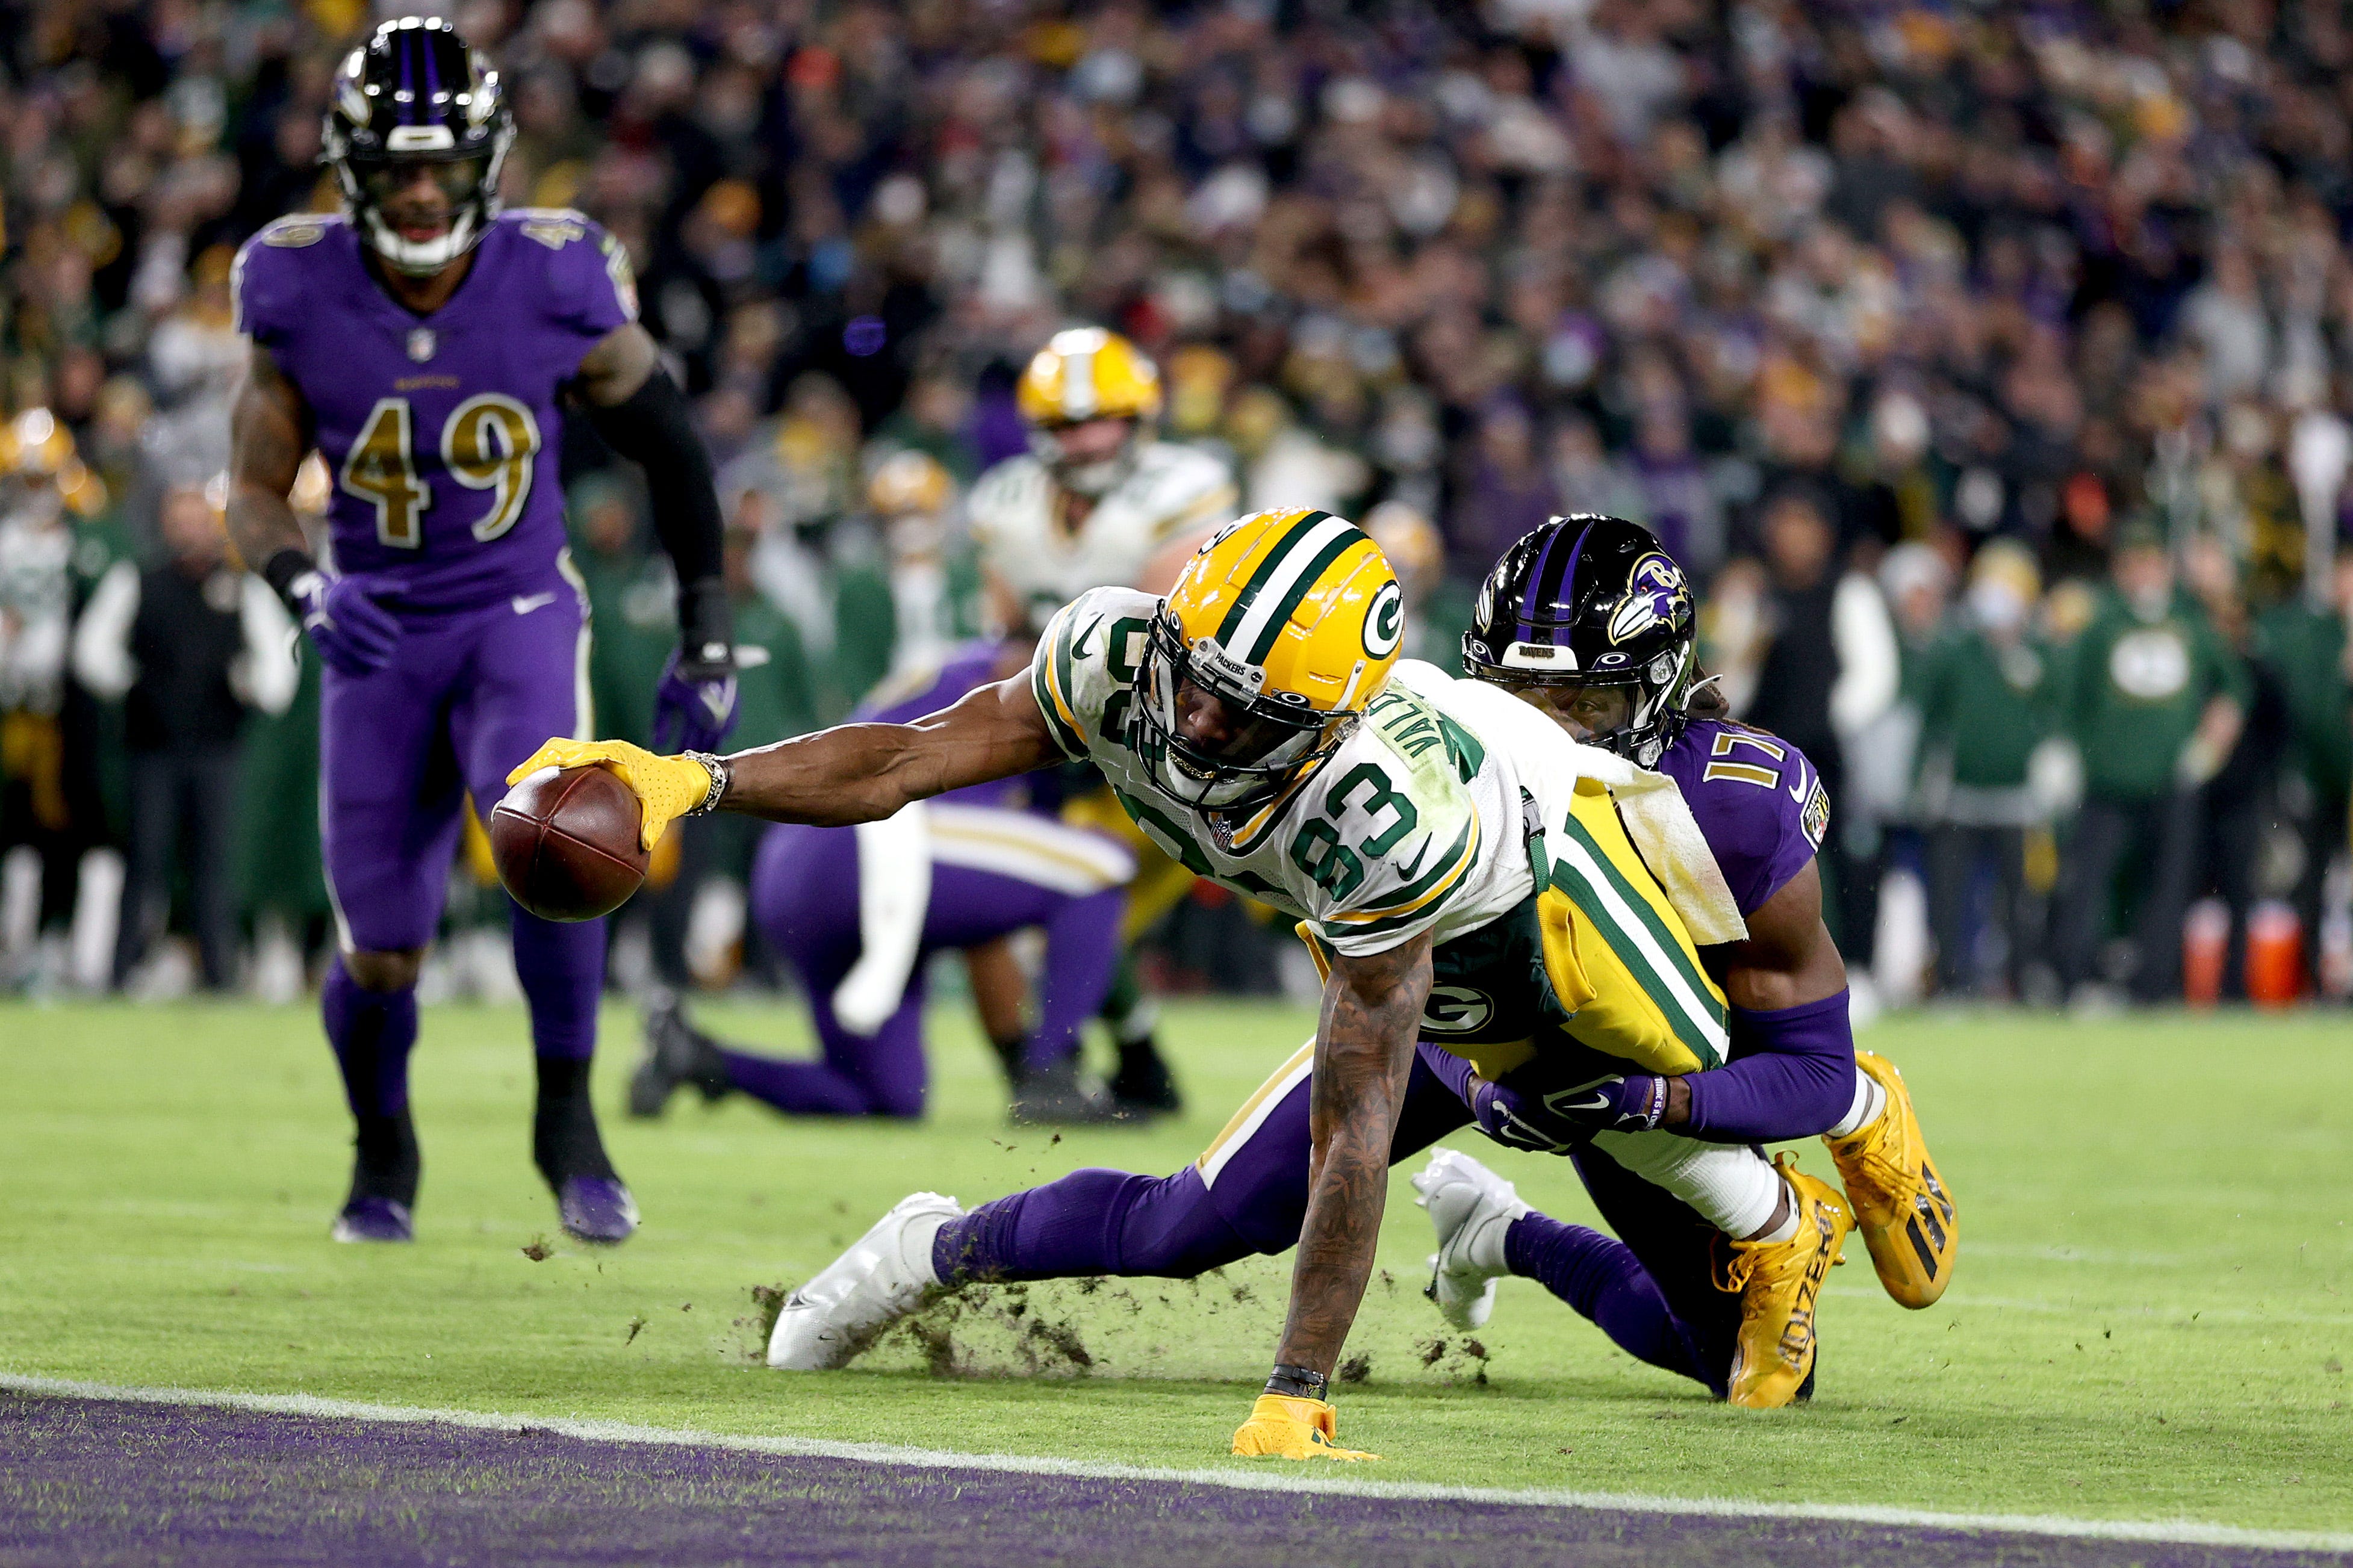 Green Bay Packers wide receiver Marquez Valdes-Scantling reaches toward the goal line to score an 11-yard touchdown with Baltimore Ravens cornerback Robert Jackson holding on in fourth quarter on Sunday, Dec. 19, 2021, at M&T Bank Stadium in Baltimore.